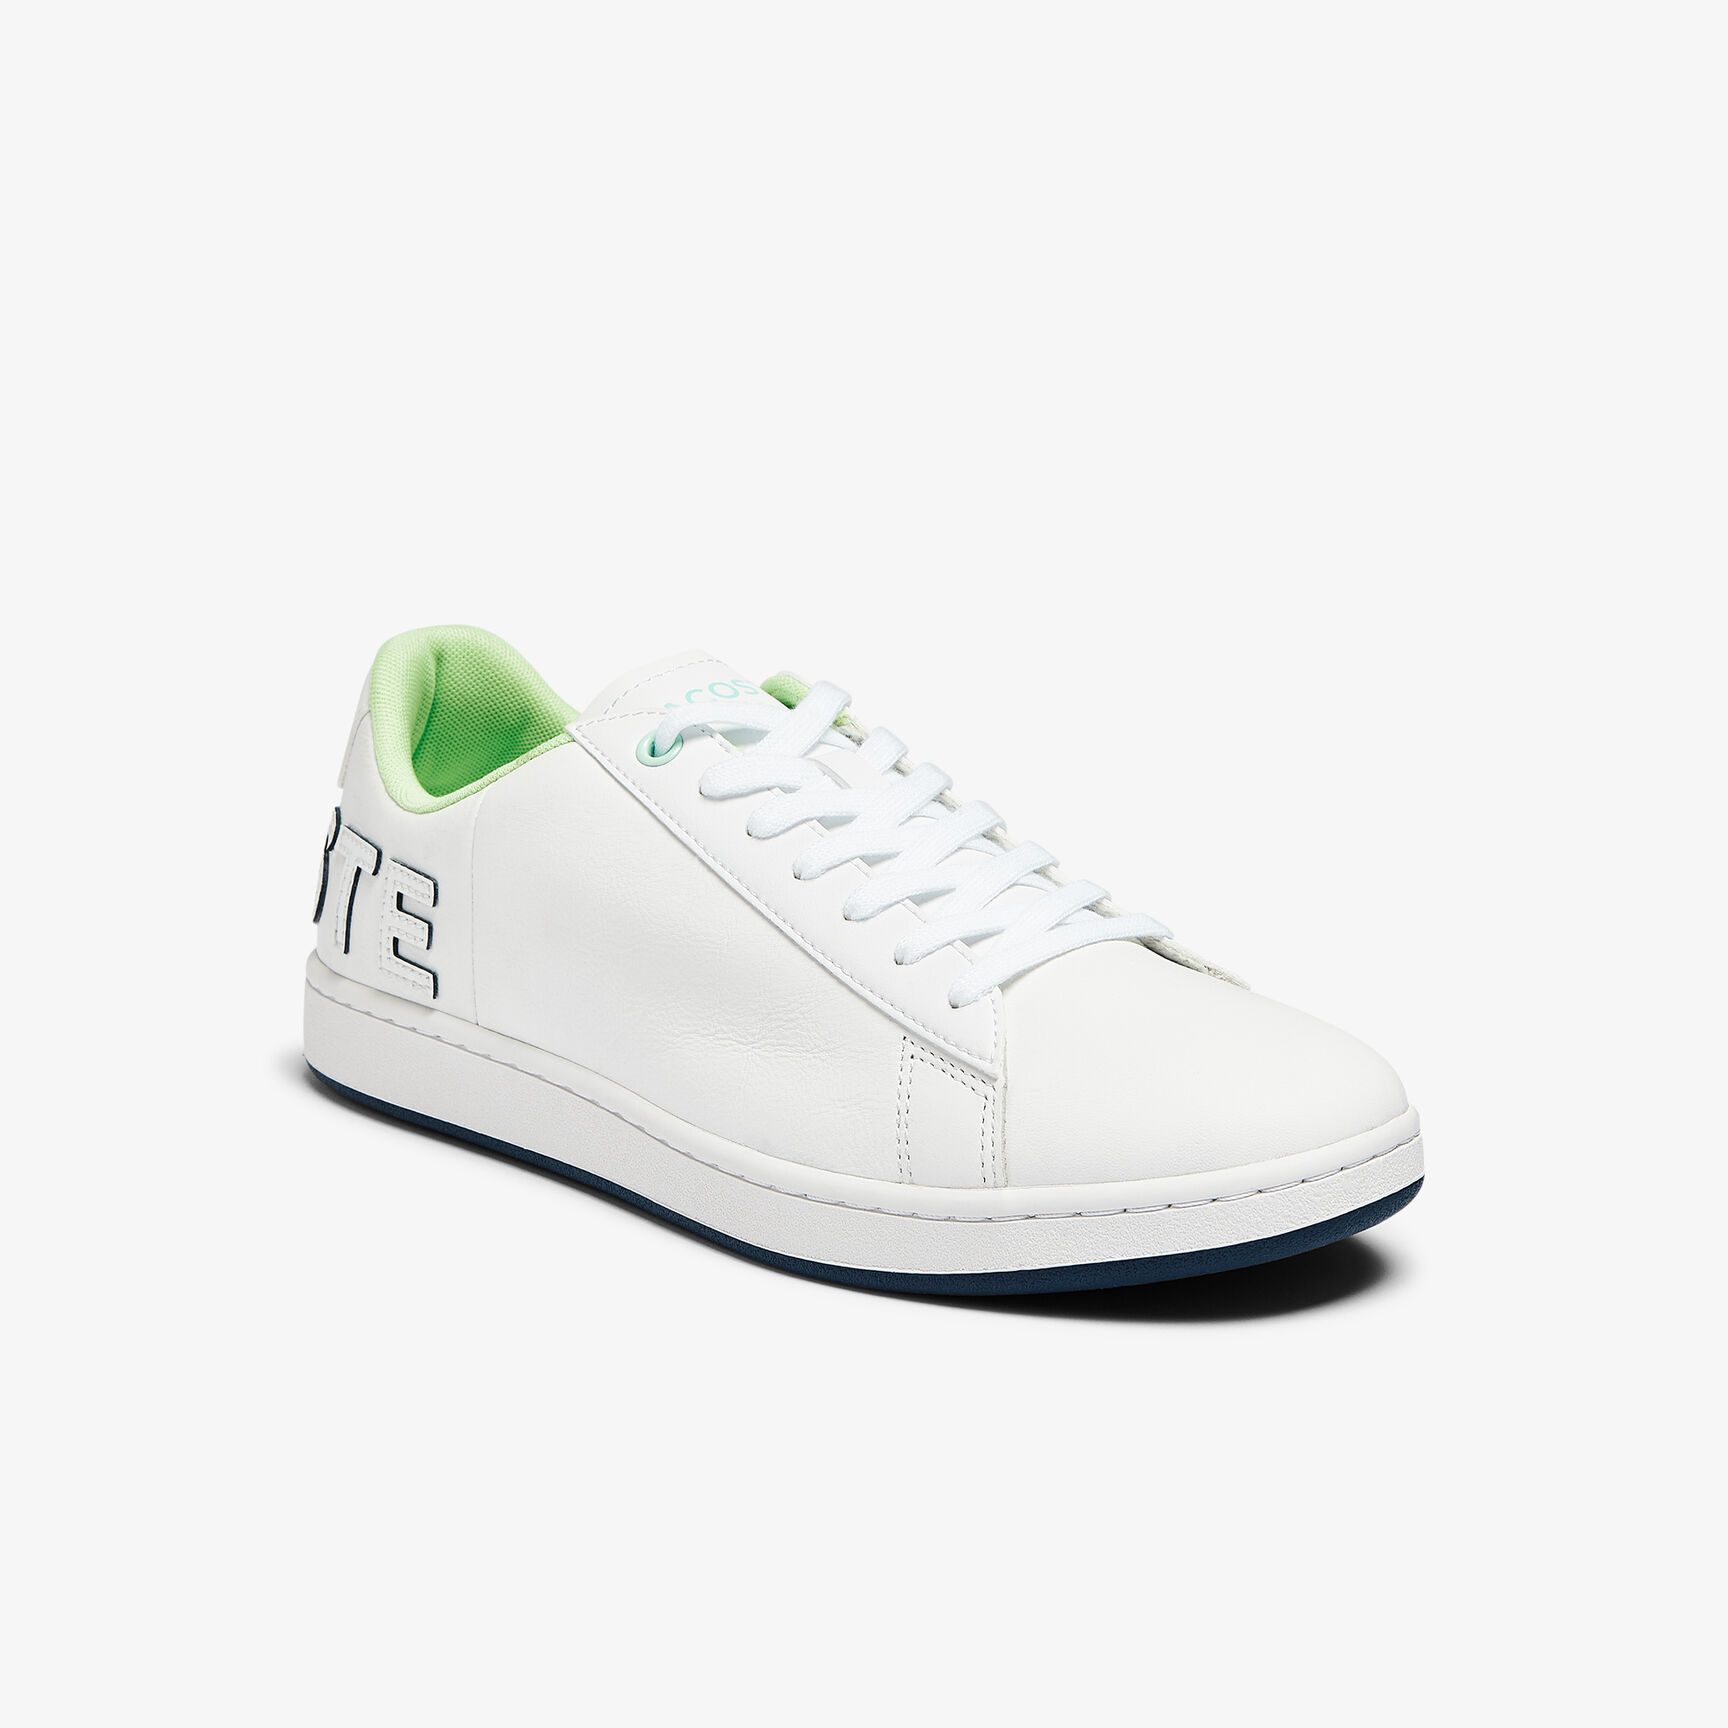 LACOSTE Carnaby Evo Leather And Citrus Accent